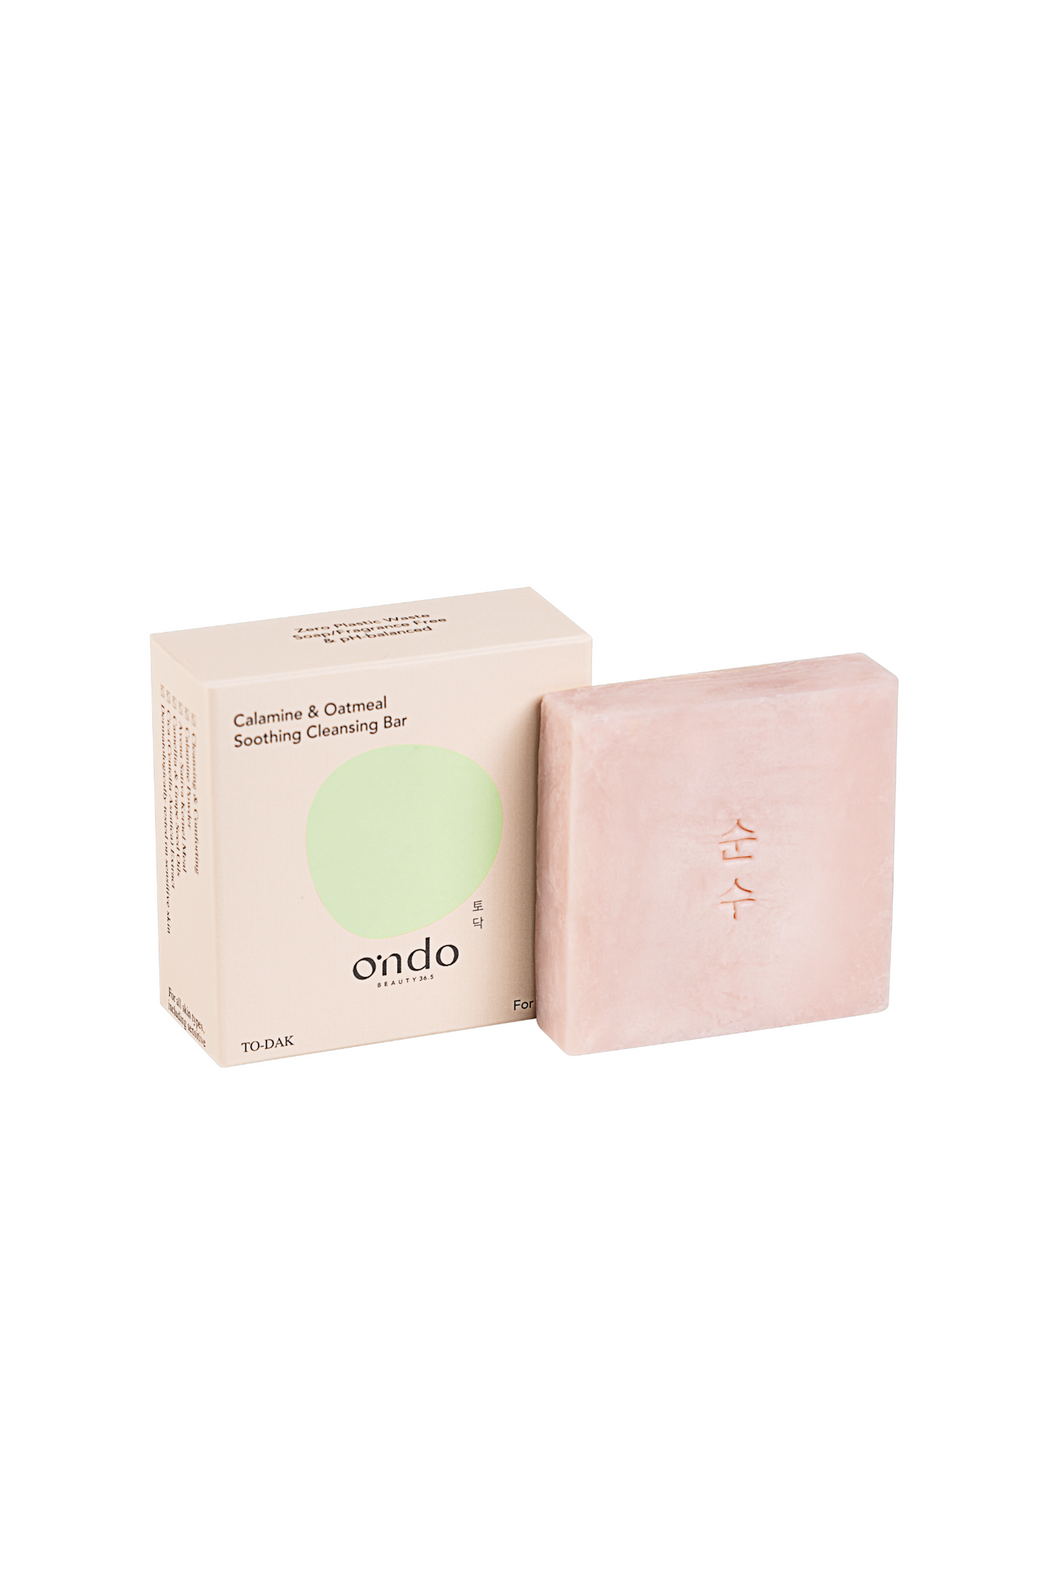 Calamine & Oatmeal Soothing Cleansing Bar